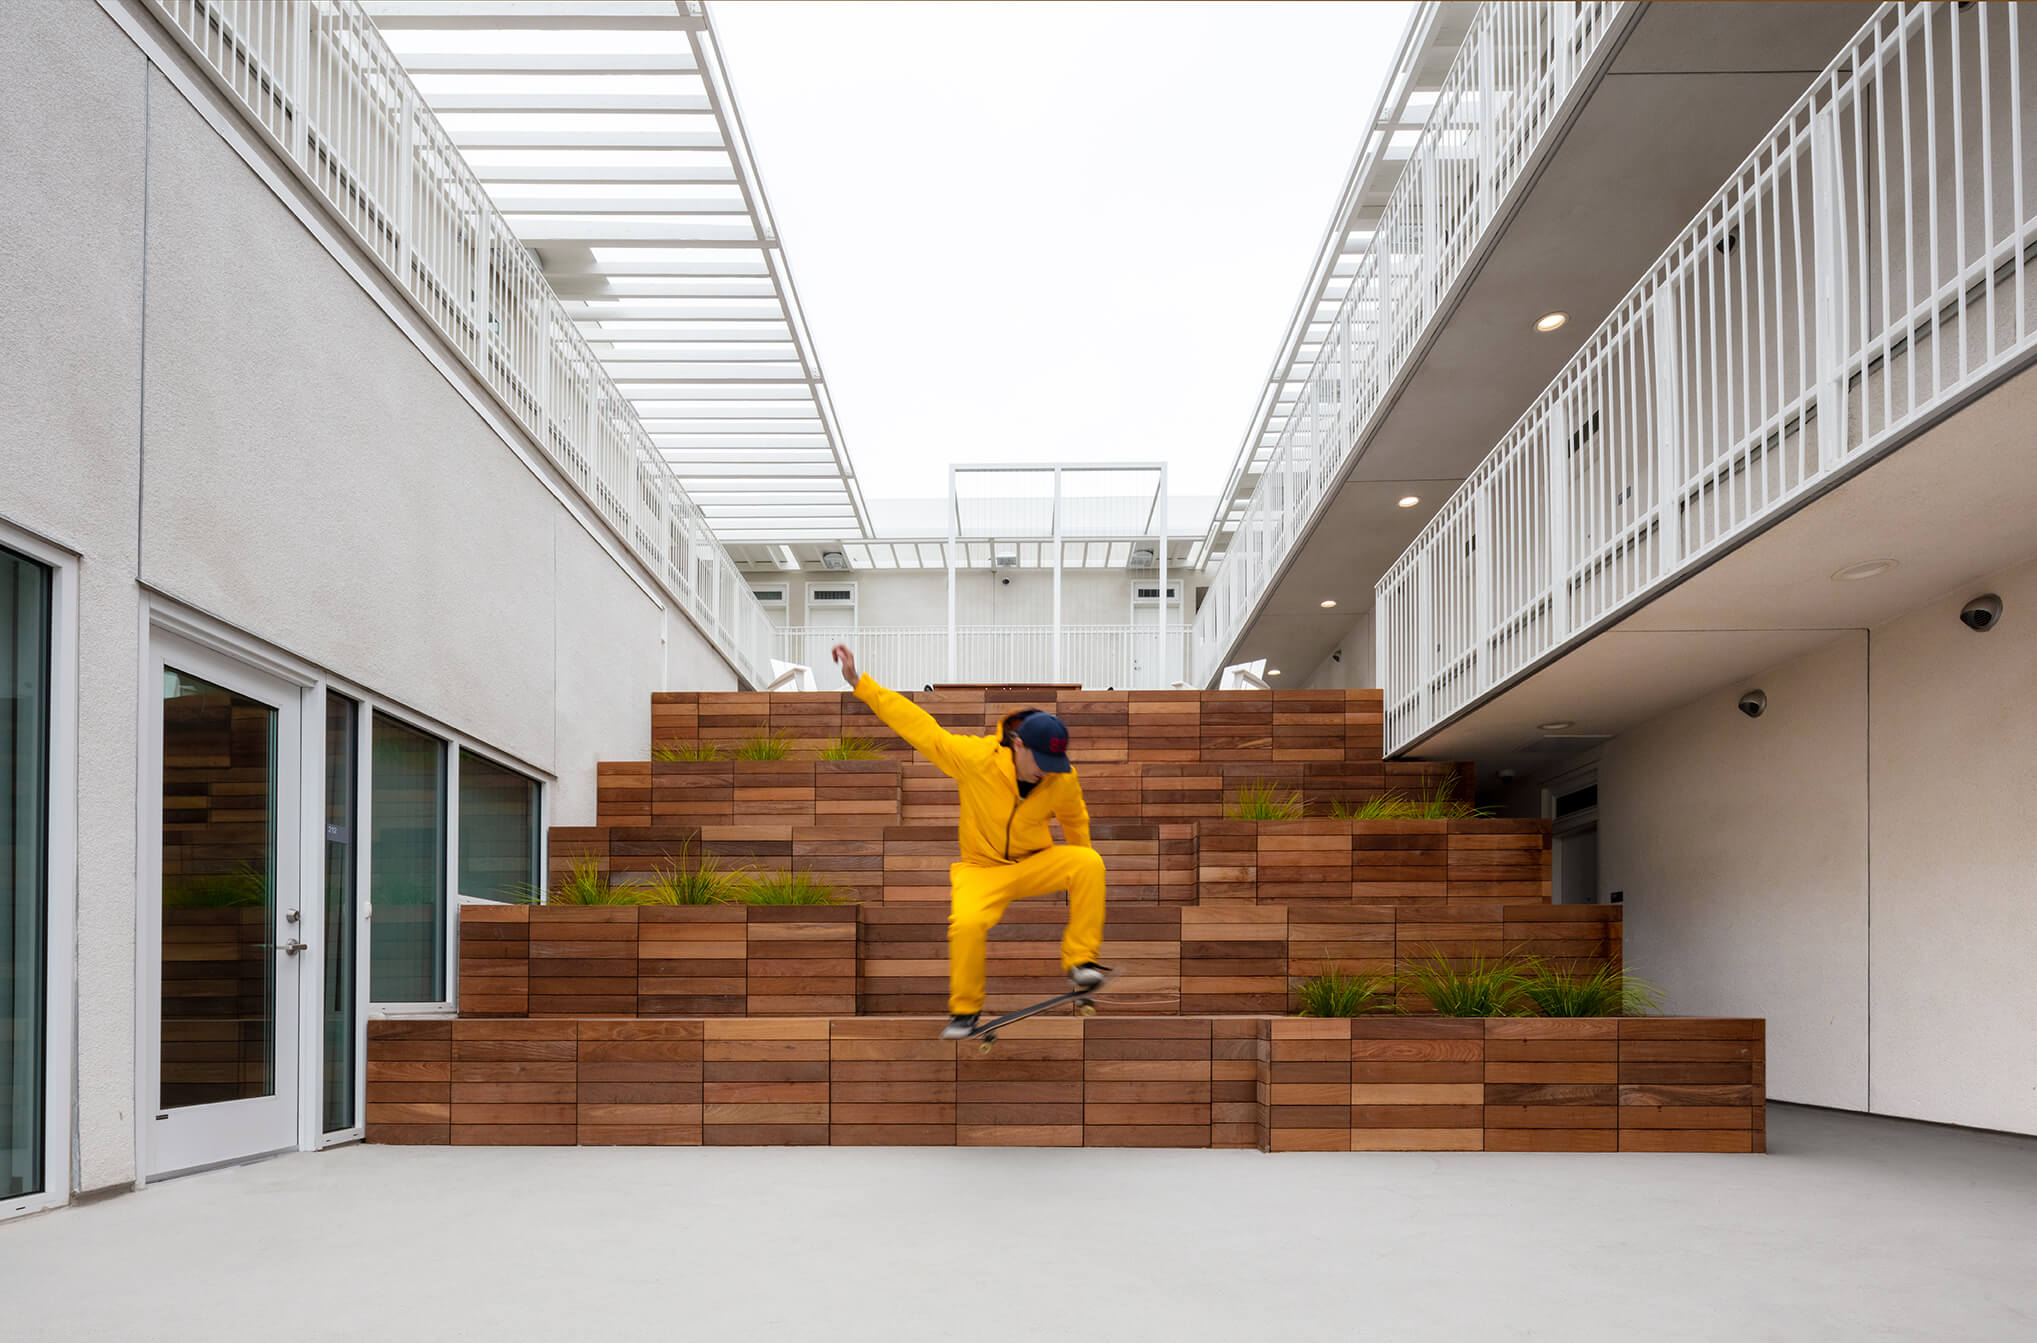 rendering of a person jumping down an outdoor social staircase